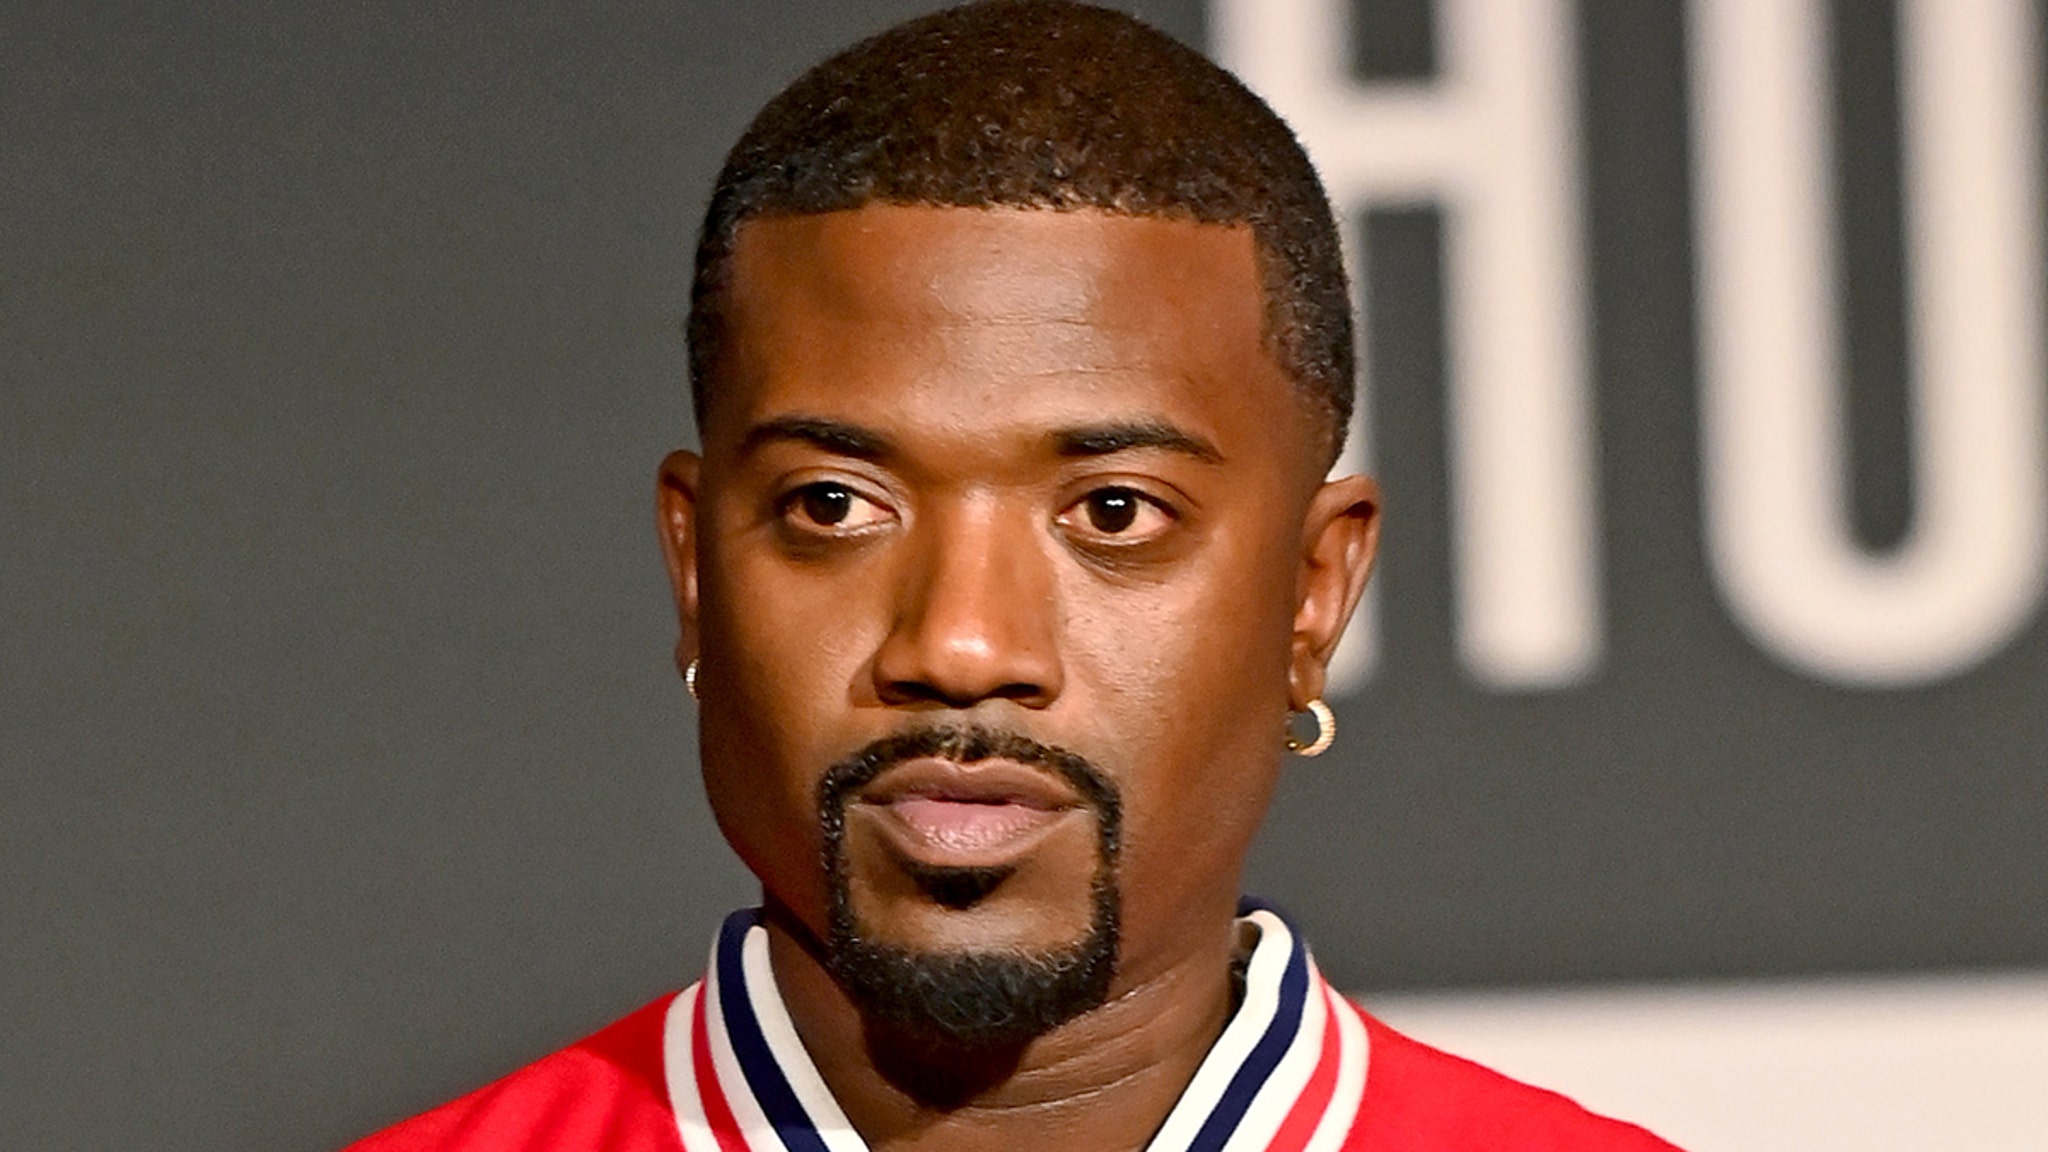 Ray J Says He’s Suicidal Following Near Brawl After BET Awards